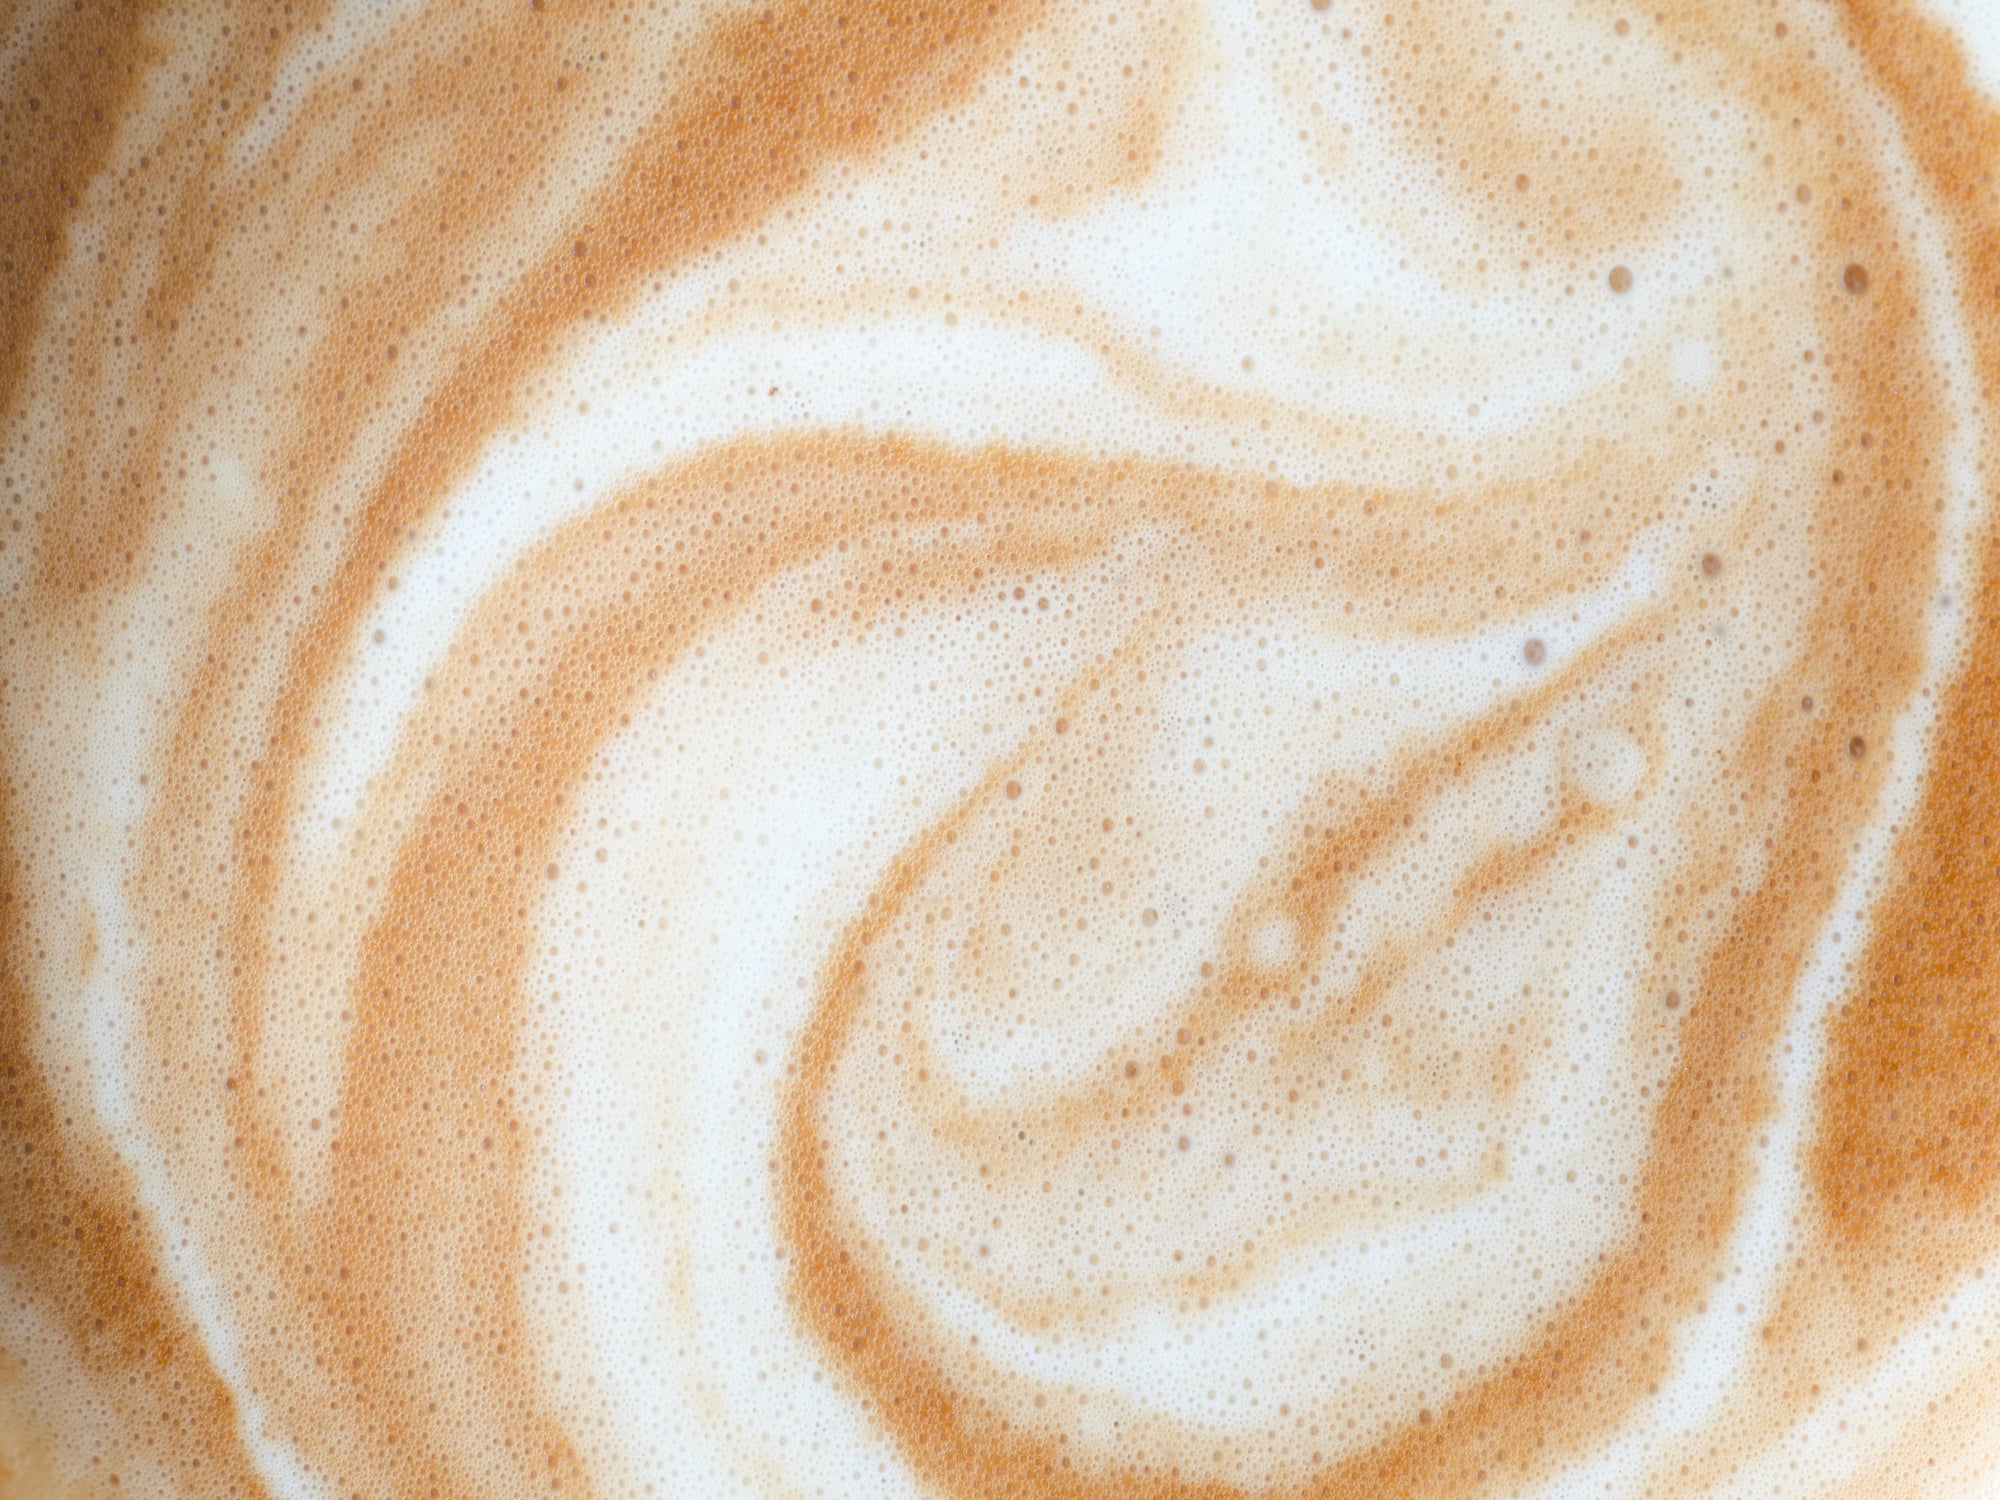 How to make a latte at home – with no fancy equipment